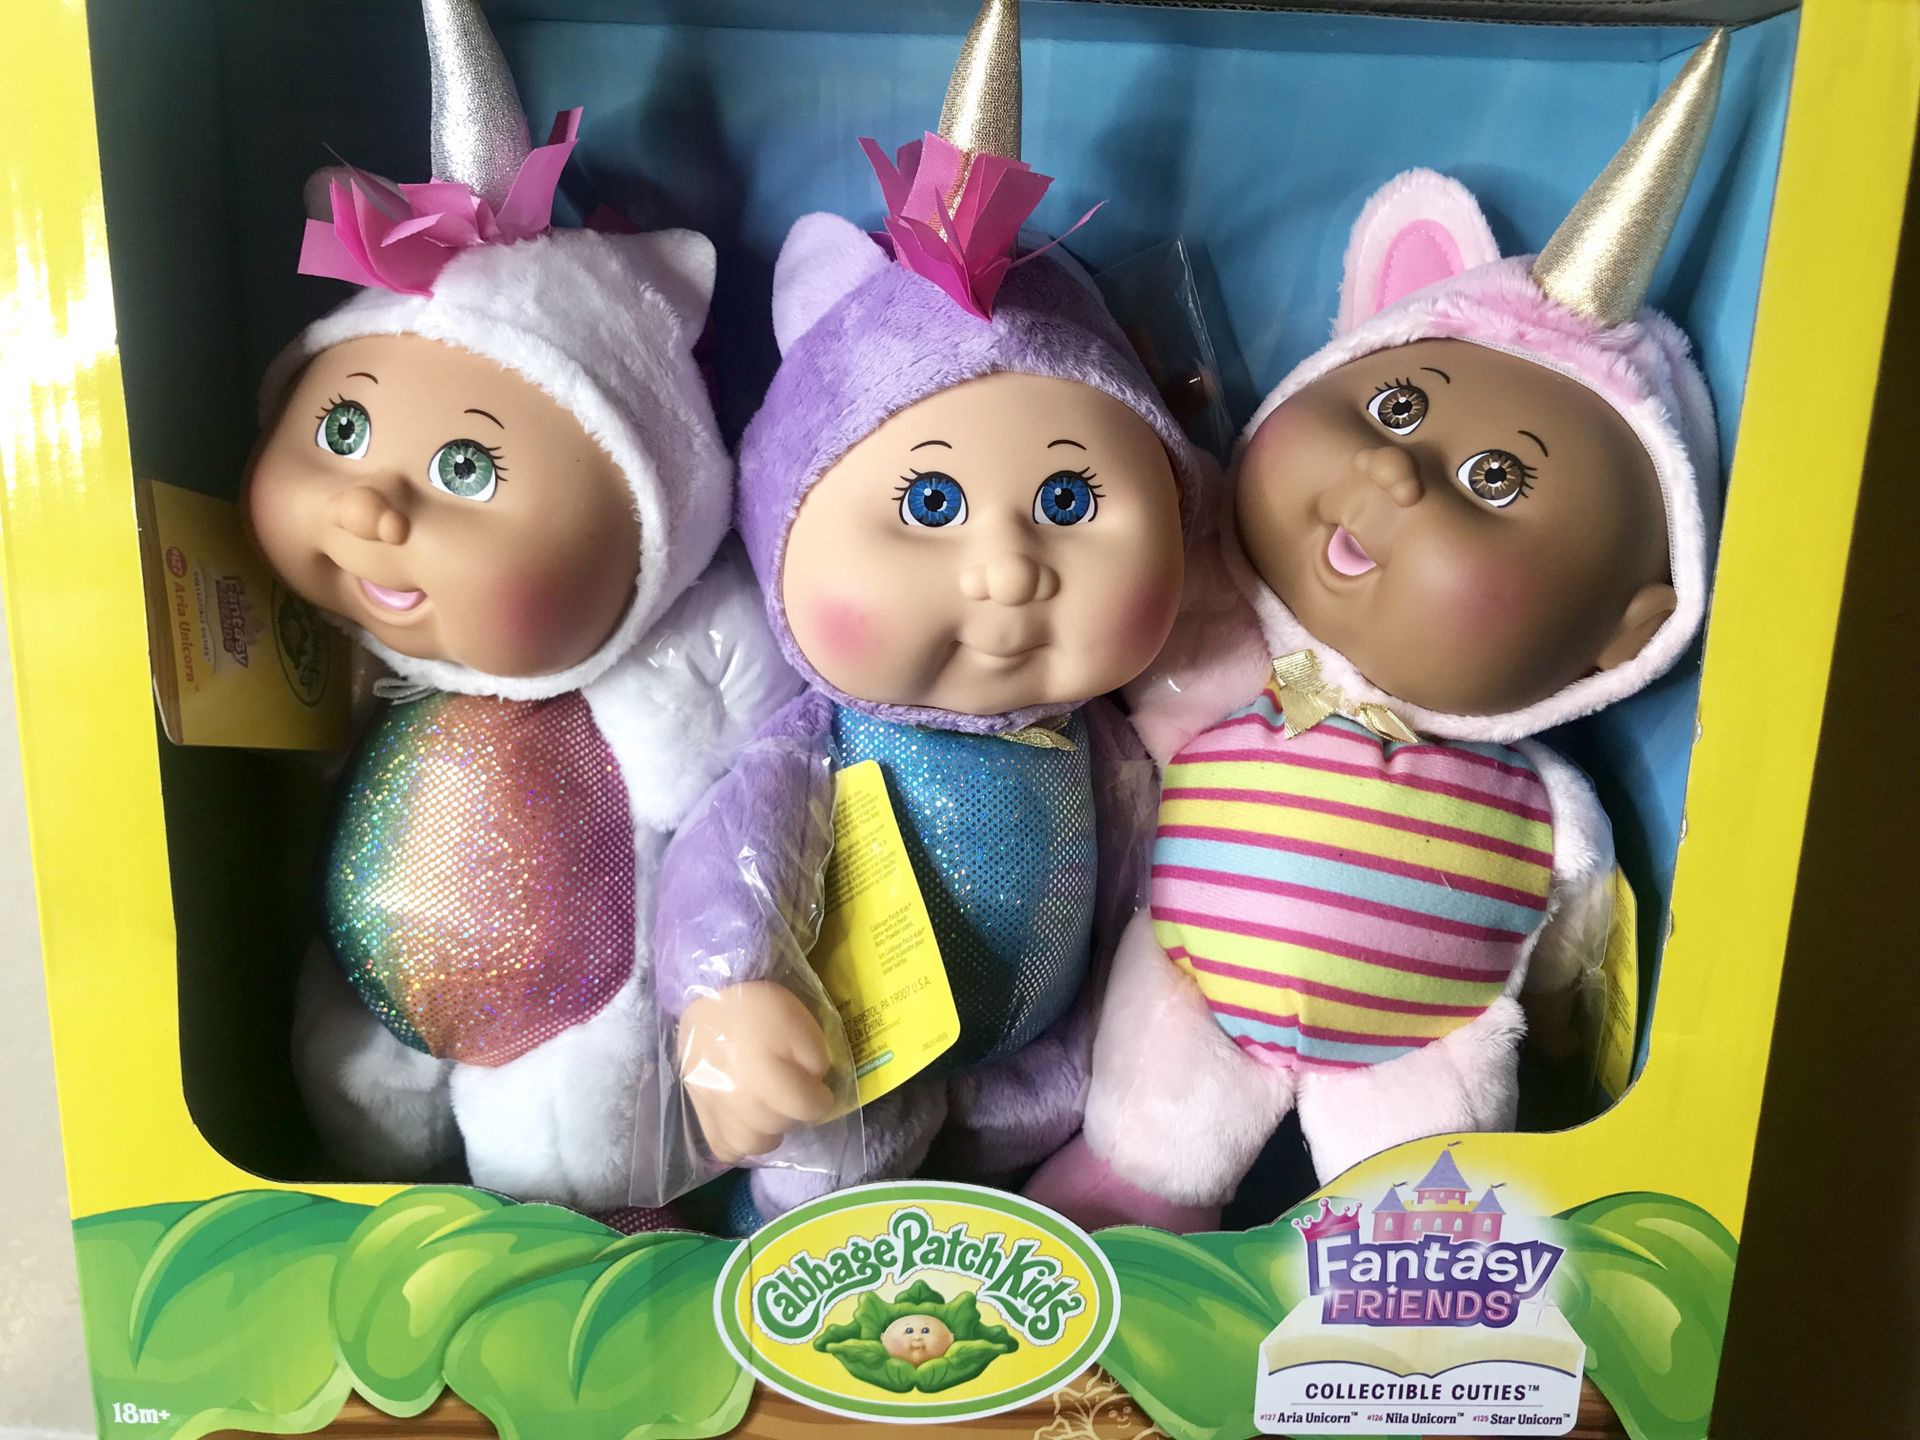 Brand New Cabbage Patch Kids Dolls Collectible Cuties Fantasy Friends Unicorns